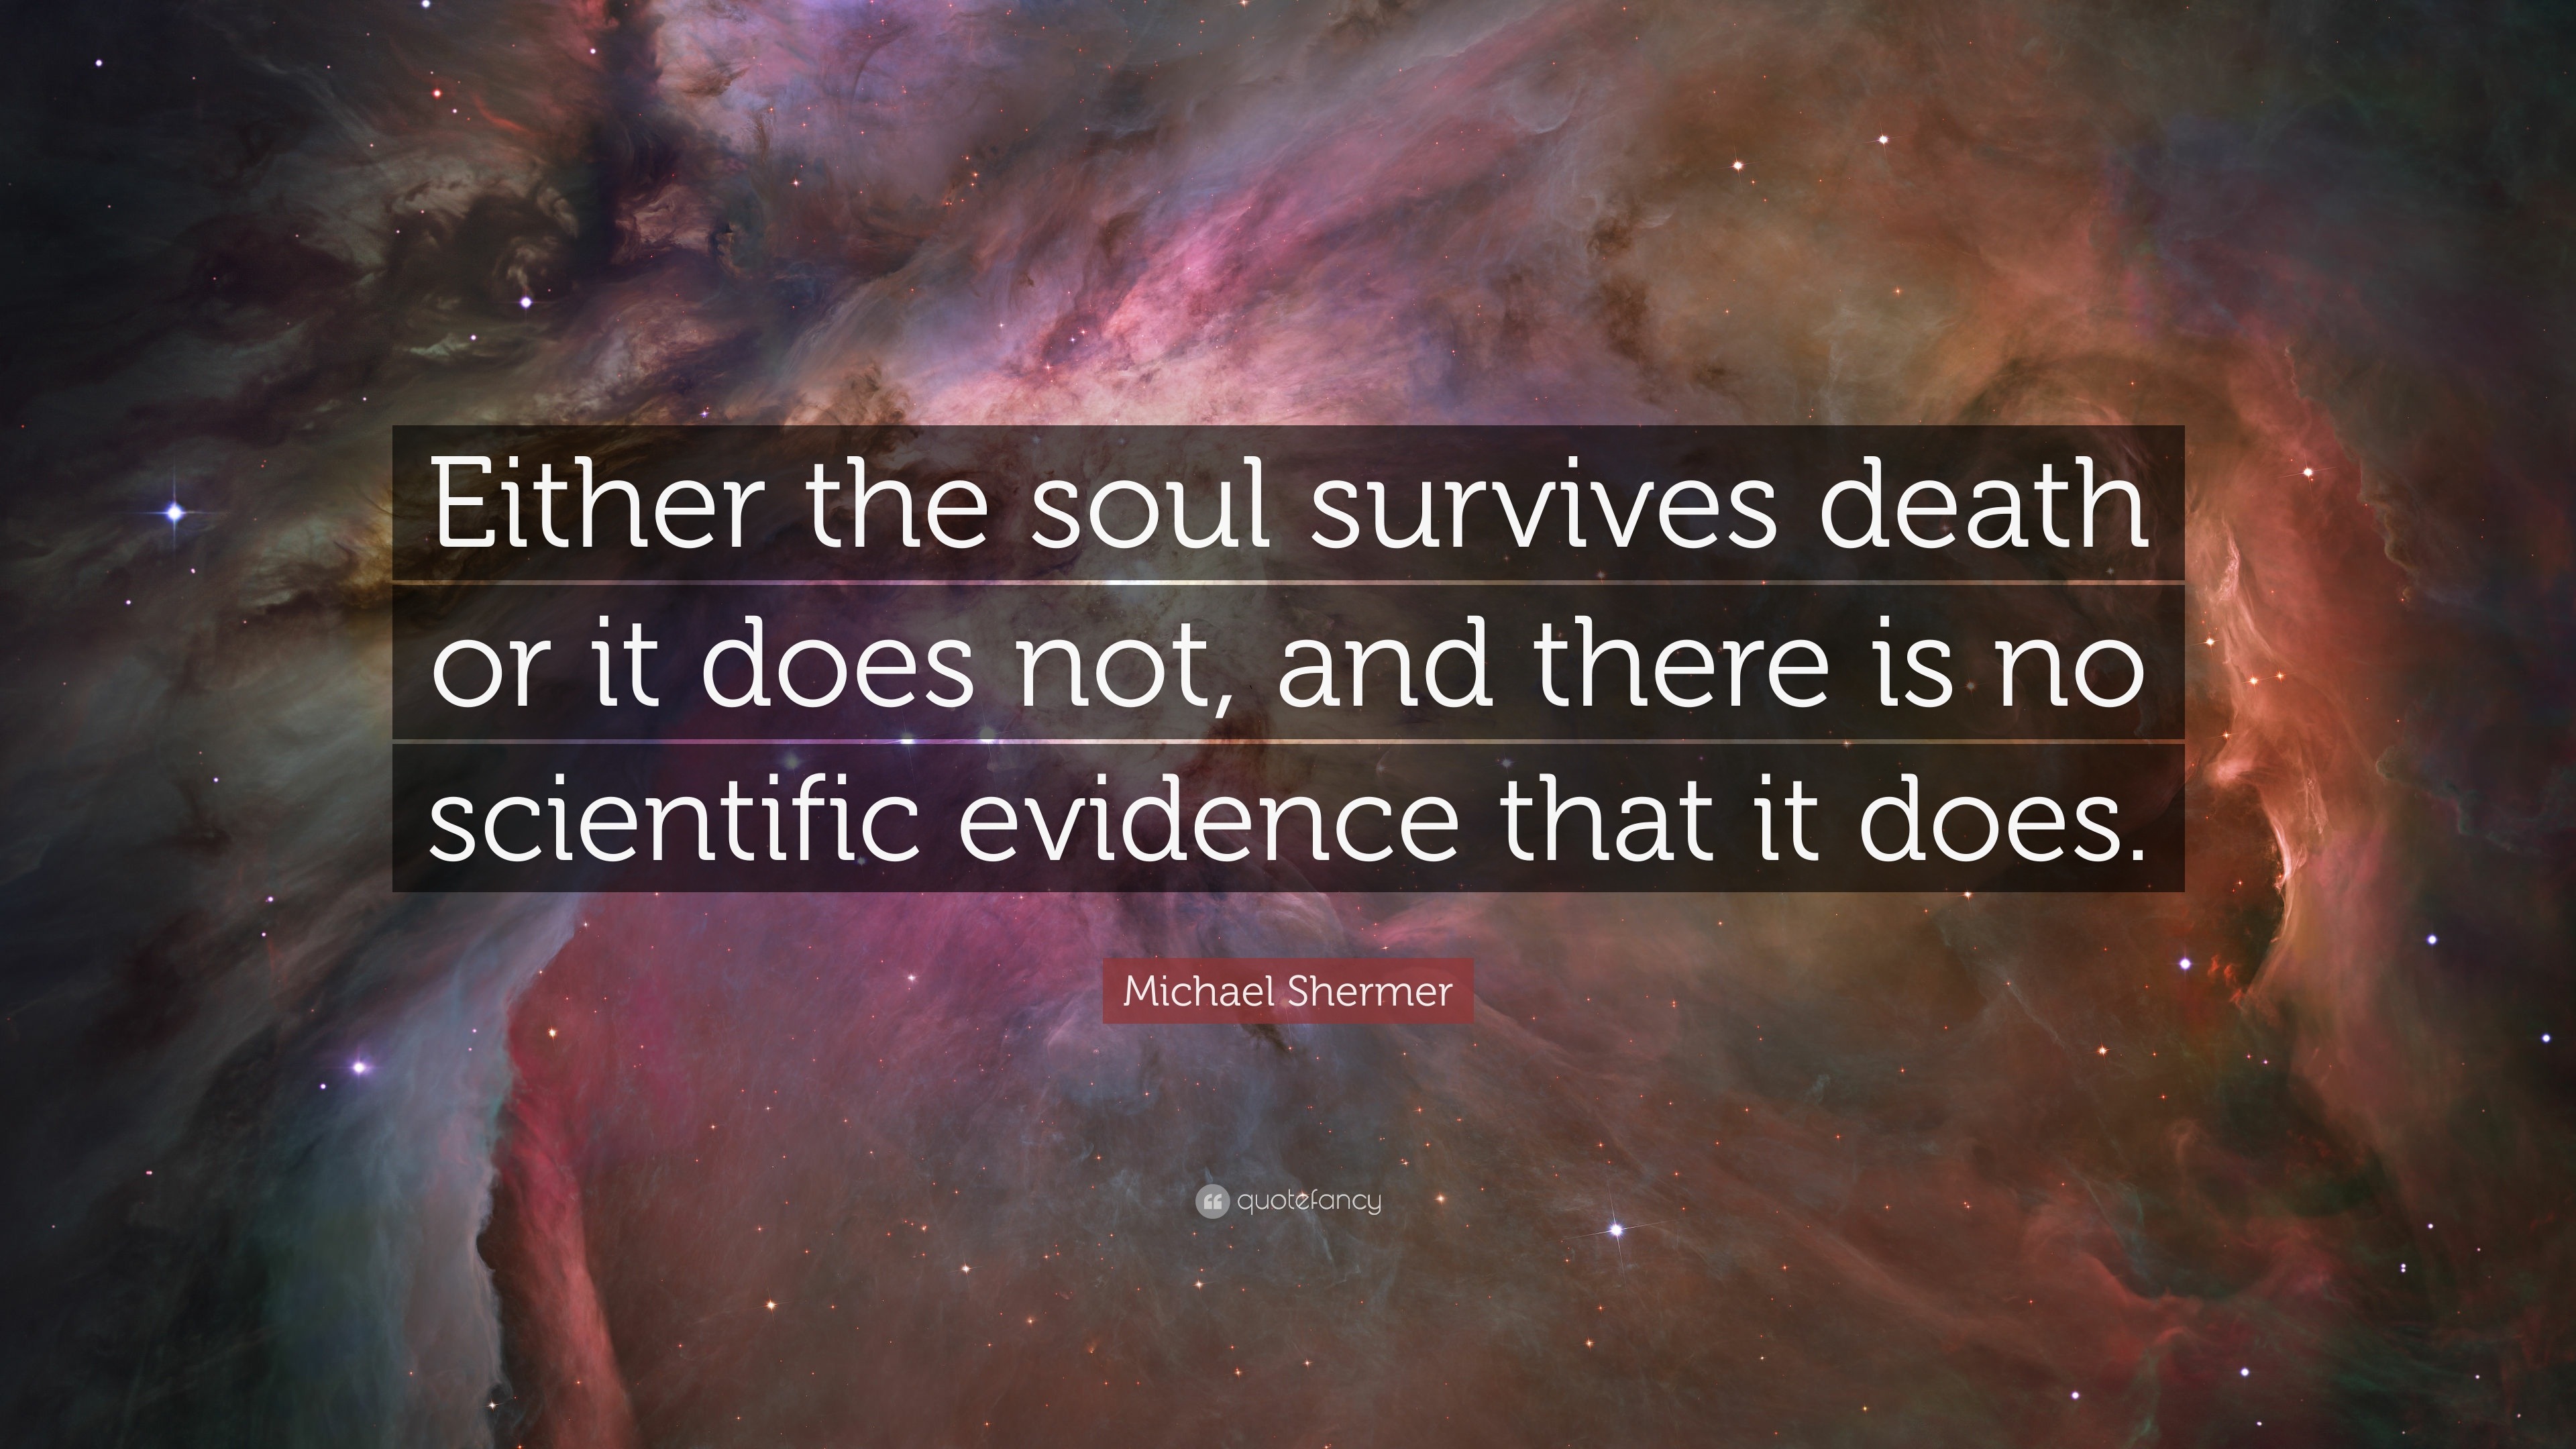 is there scientific evidence of a soul